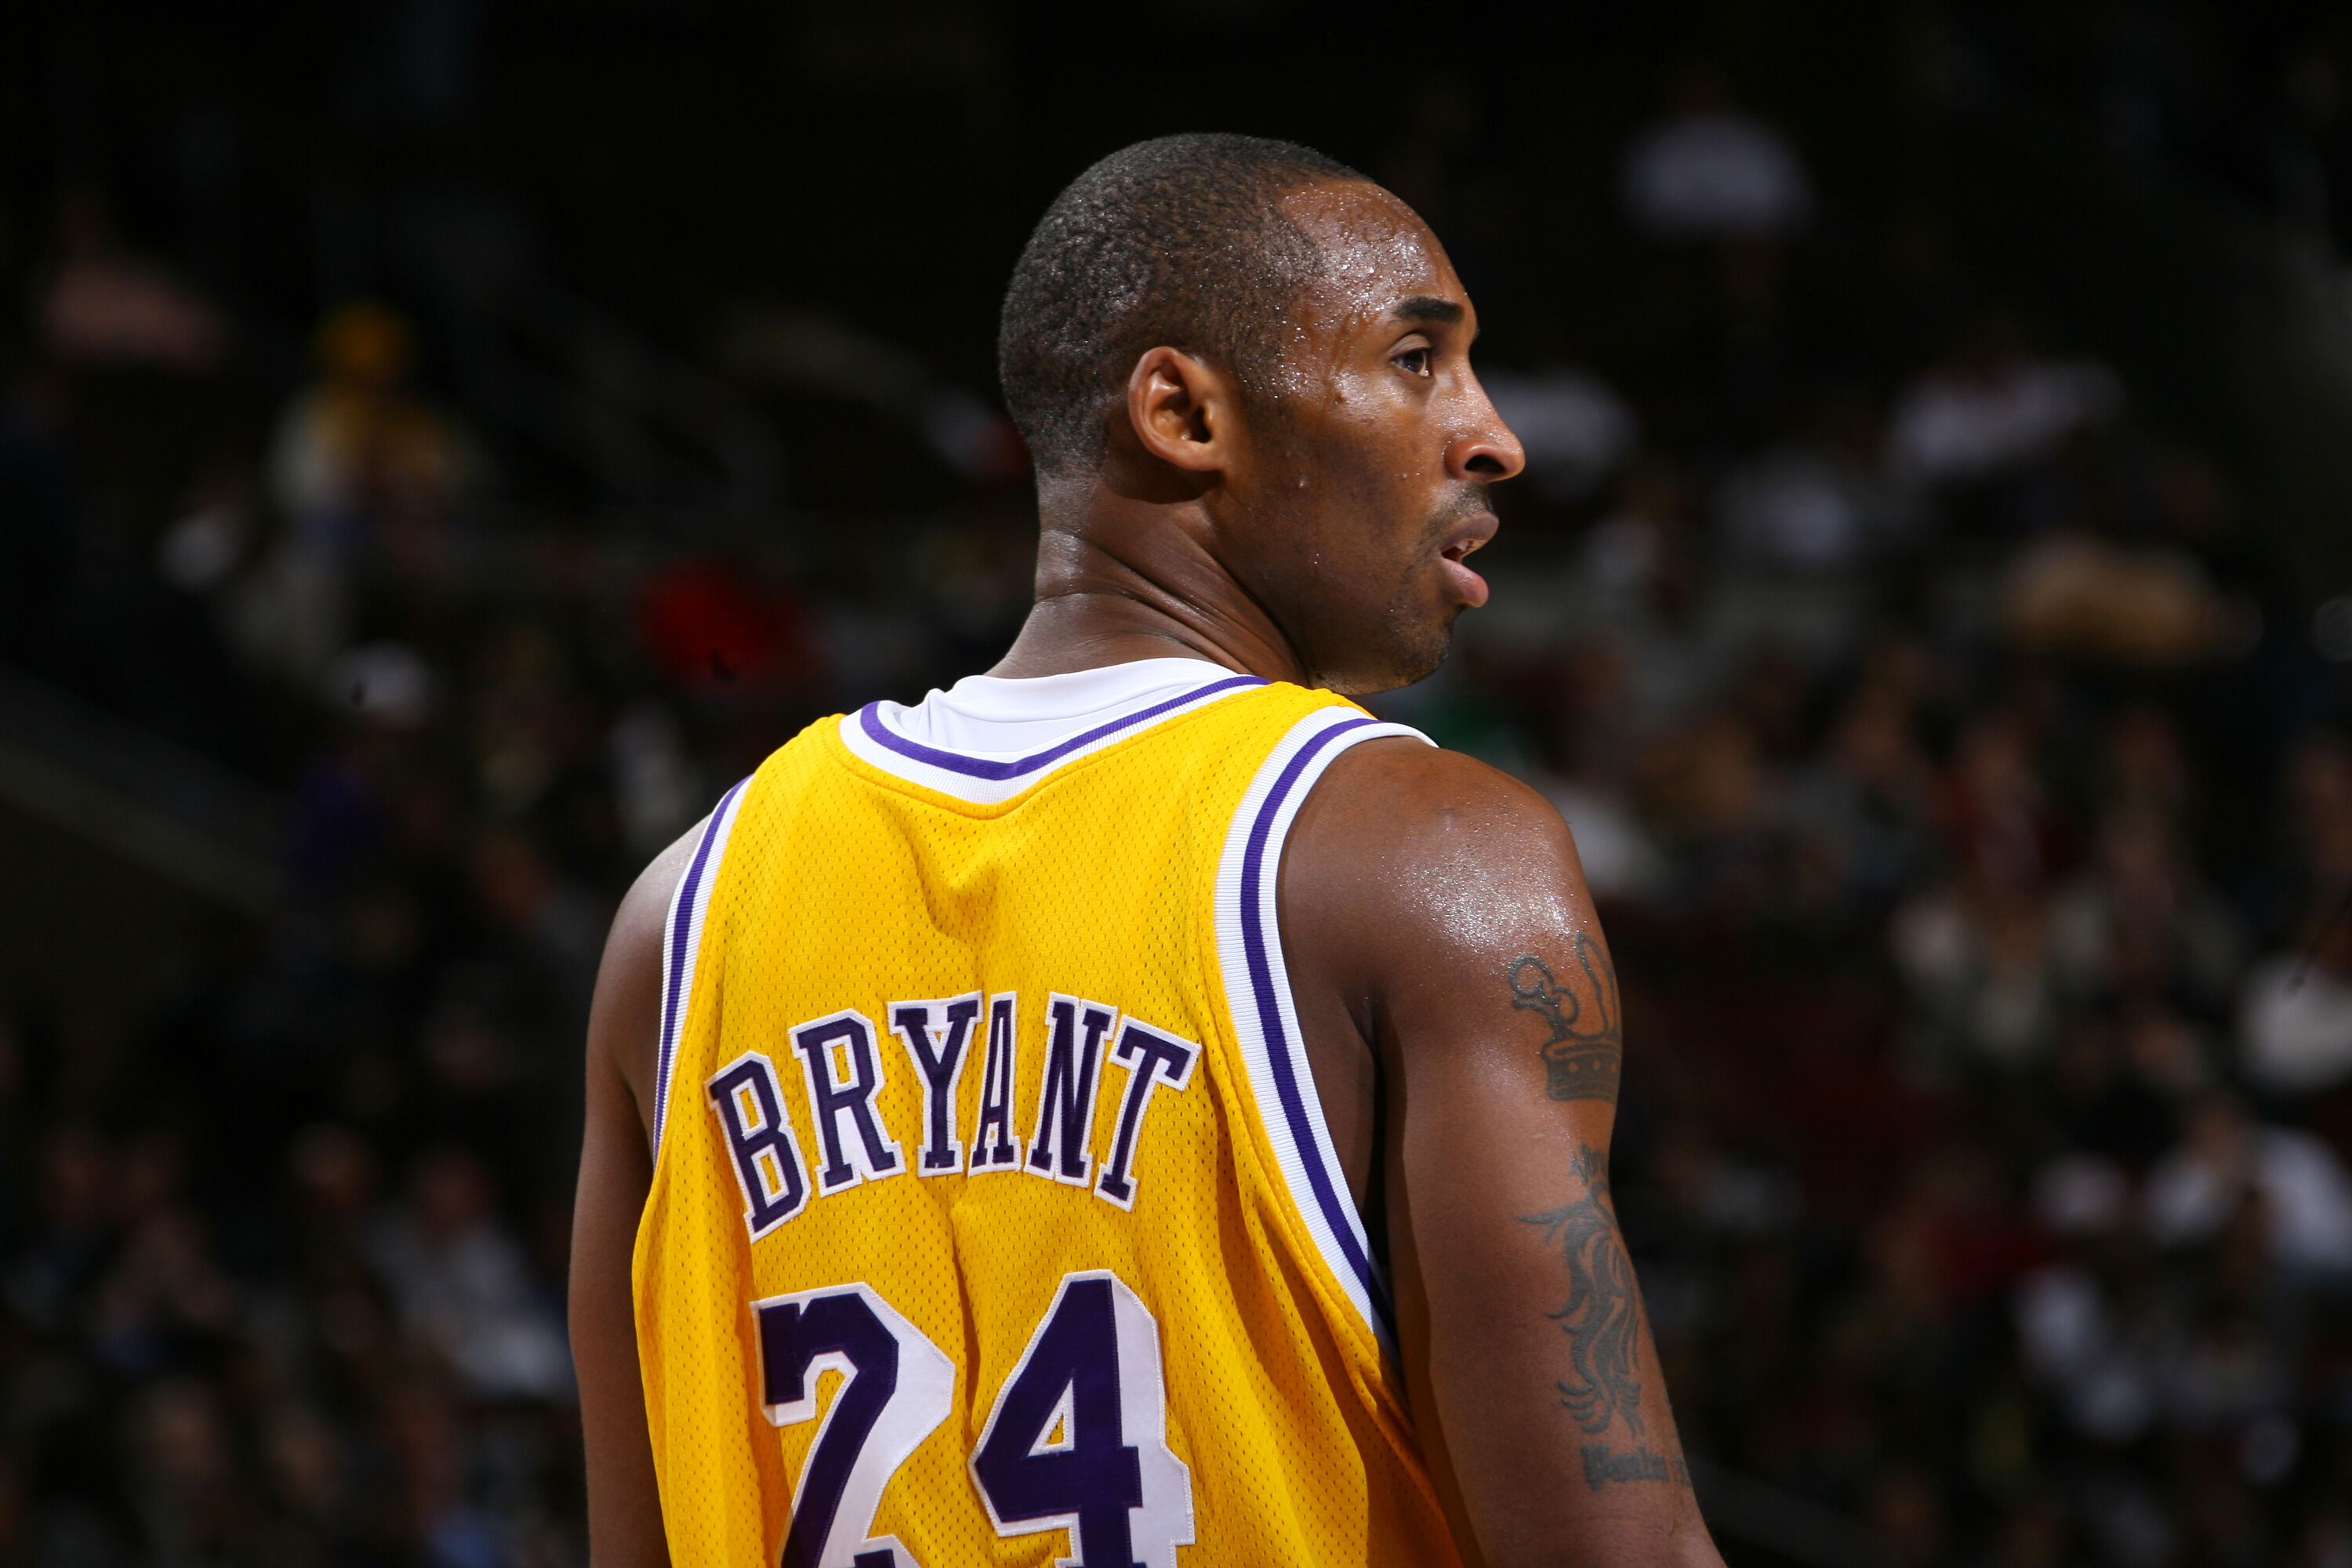 Kobe Bryant at an LA Lakers game | Source: Getty Images/GlobalImagesUkraine